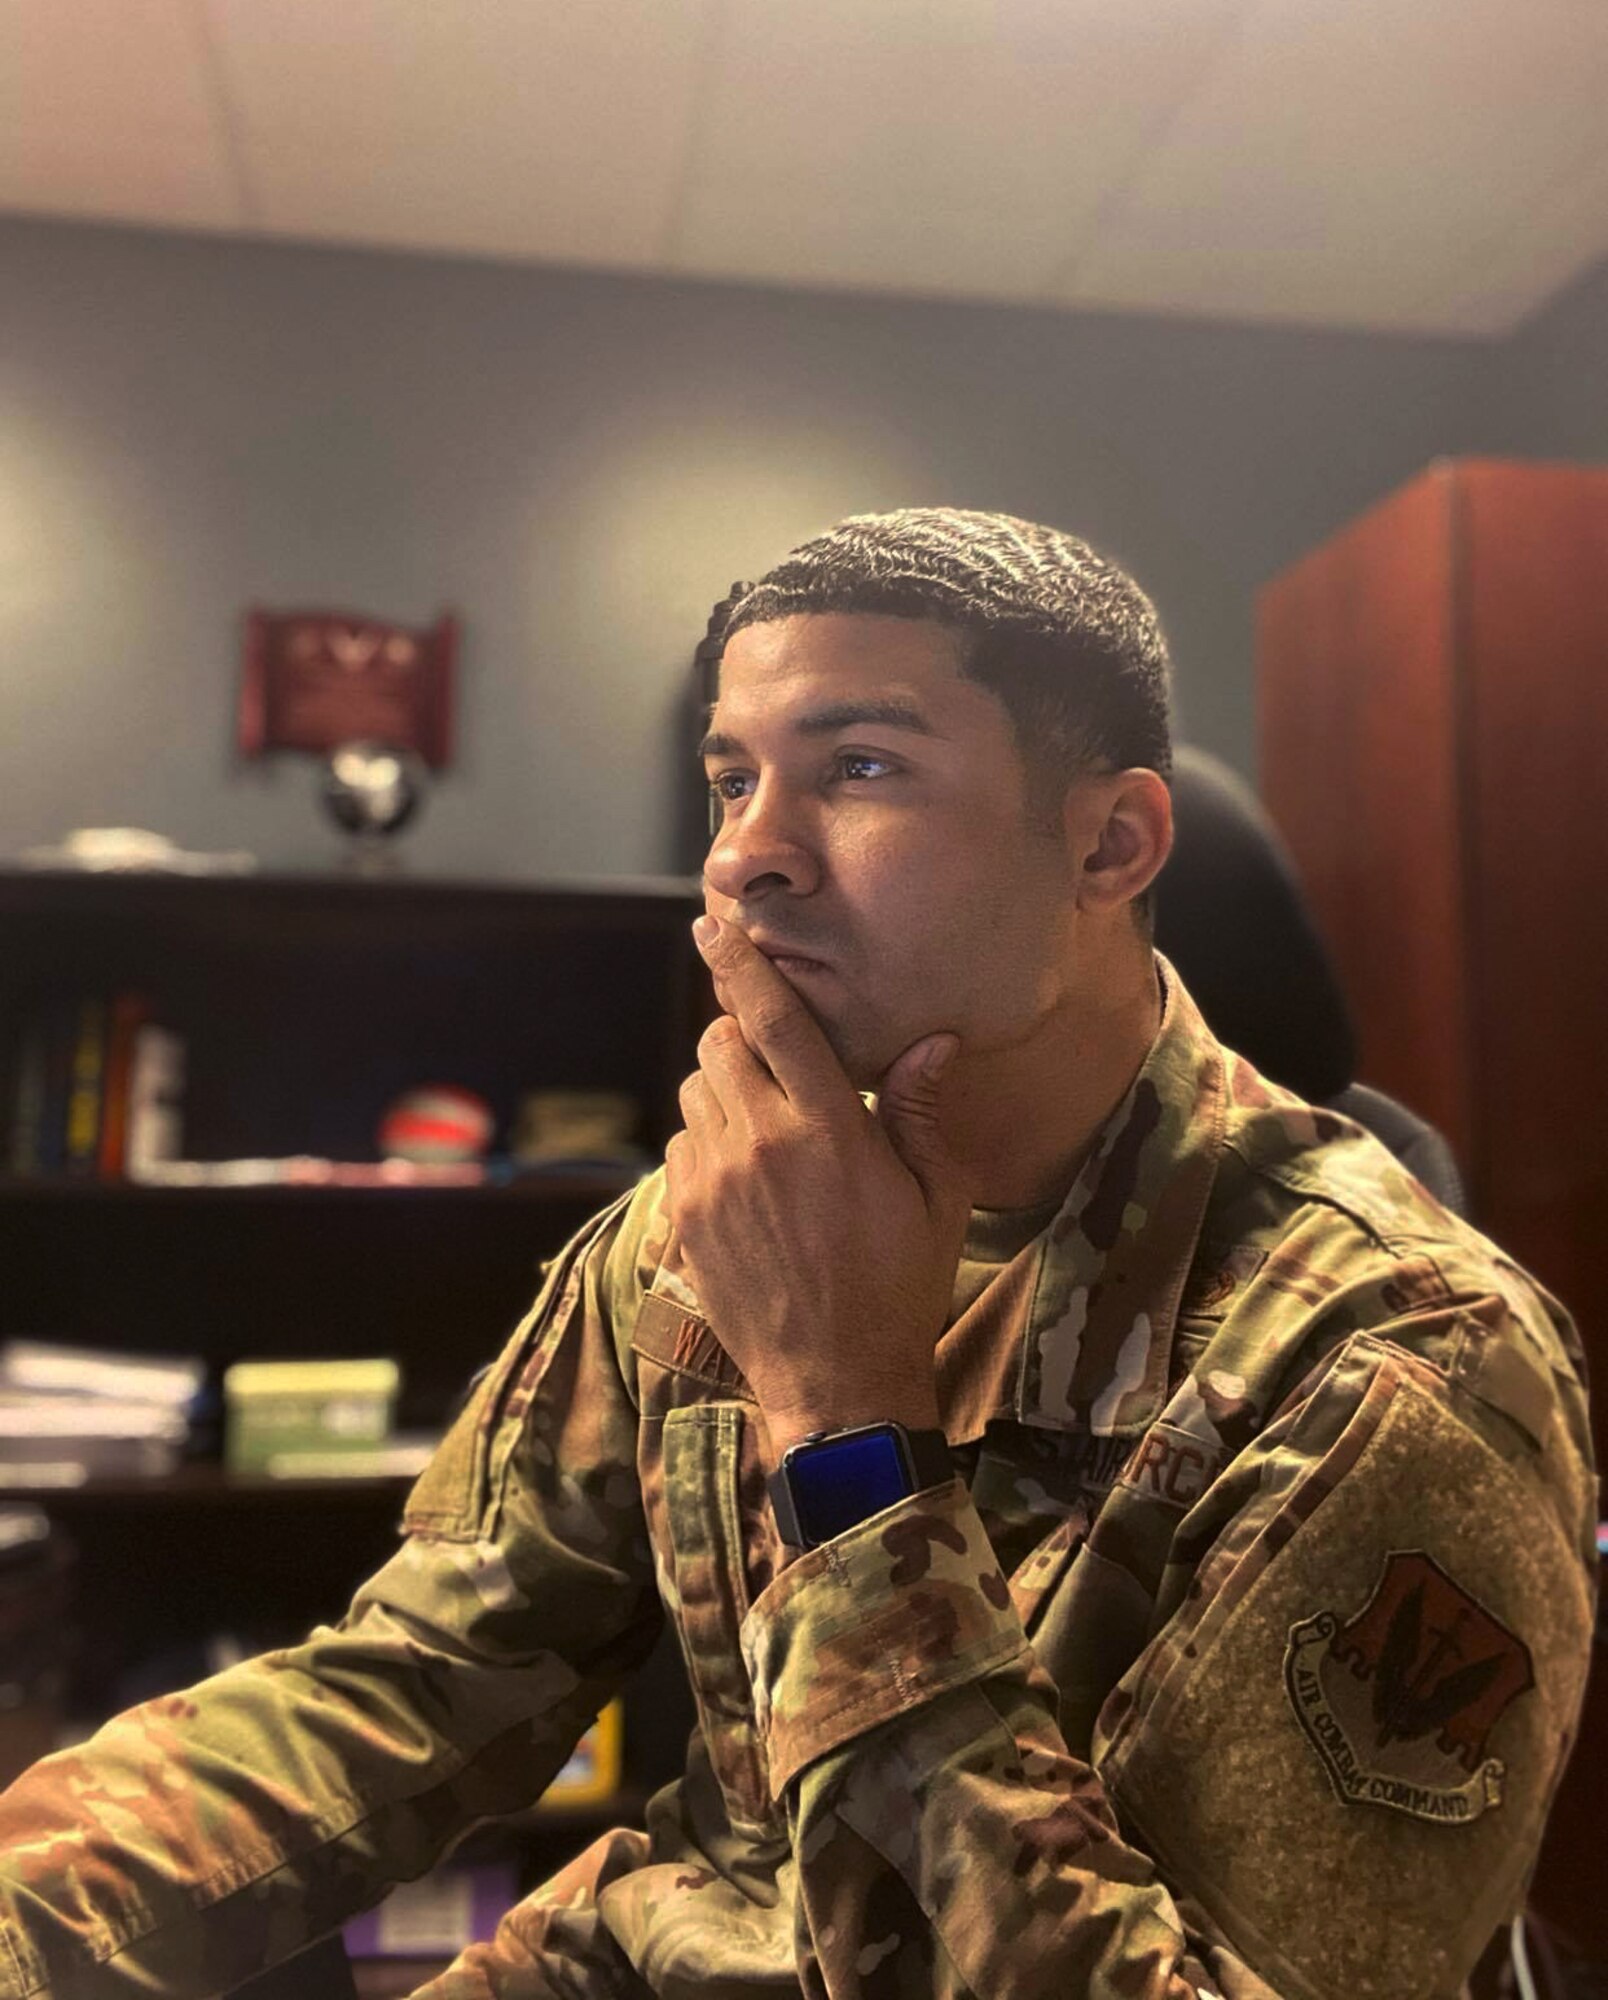 U.S. Air Force Staff Sgt. Justin Waters, 325th Fighter Wing equal opportunity noncommissioned officer in charge, poses for a photo April 6, 2020, at Tyndall Air Force Base, Florida. Waters
has been leading the movement against suicide awareness and prevention. (Courtesy Photo)